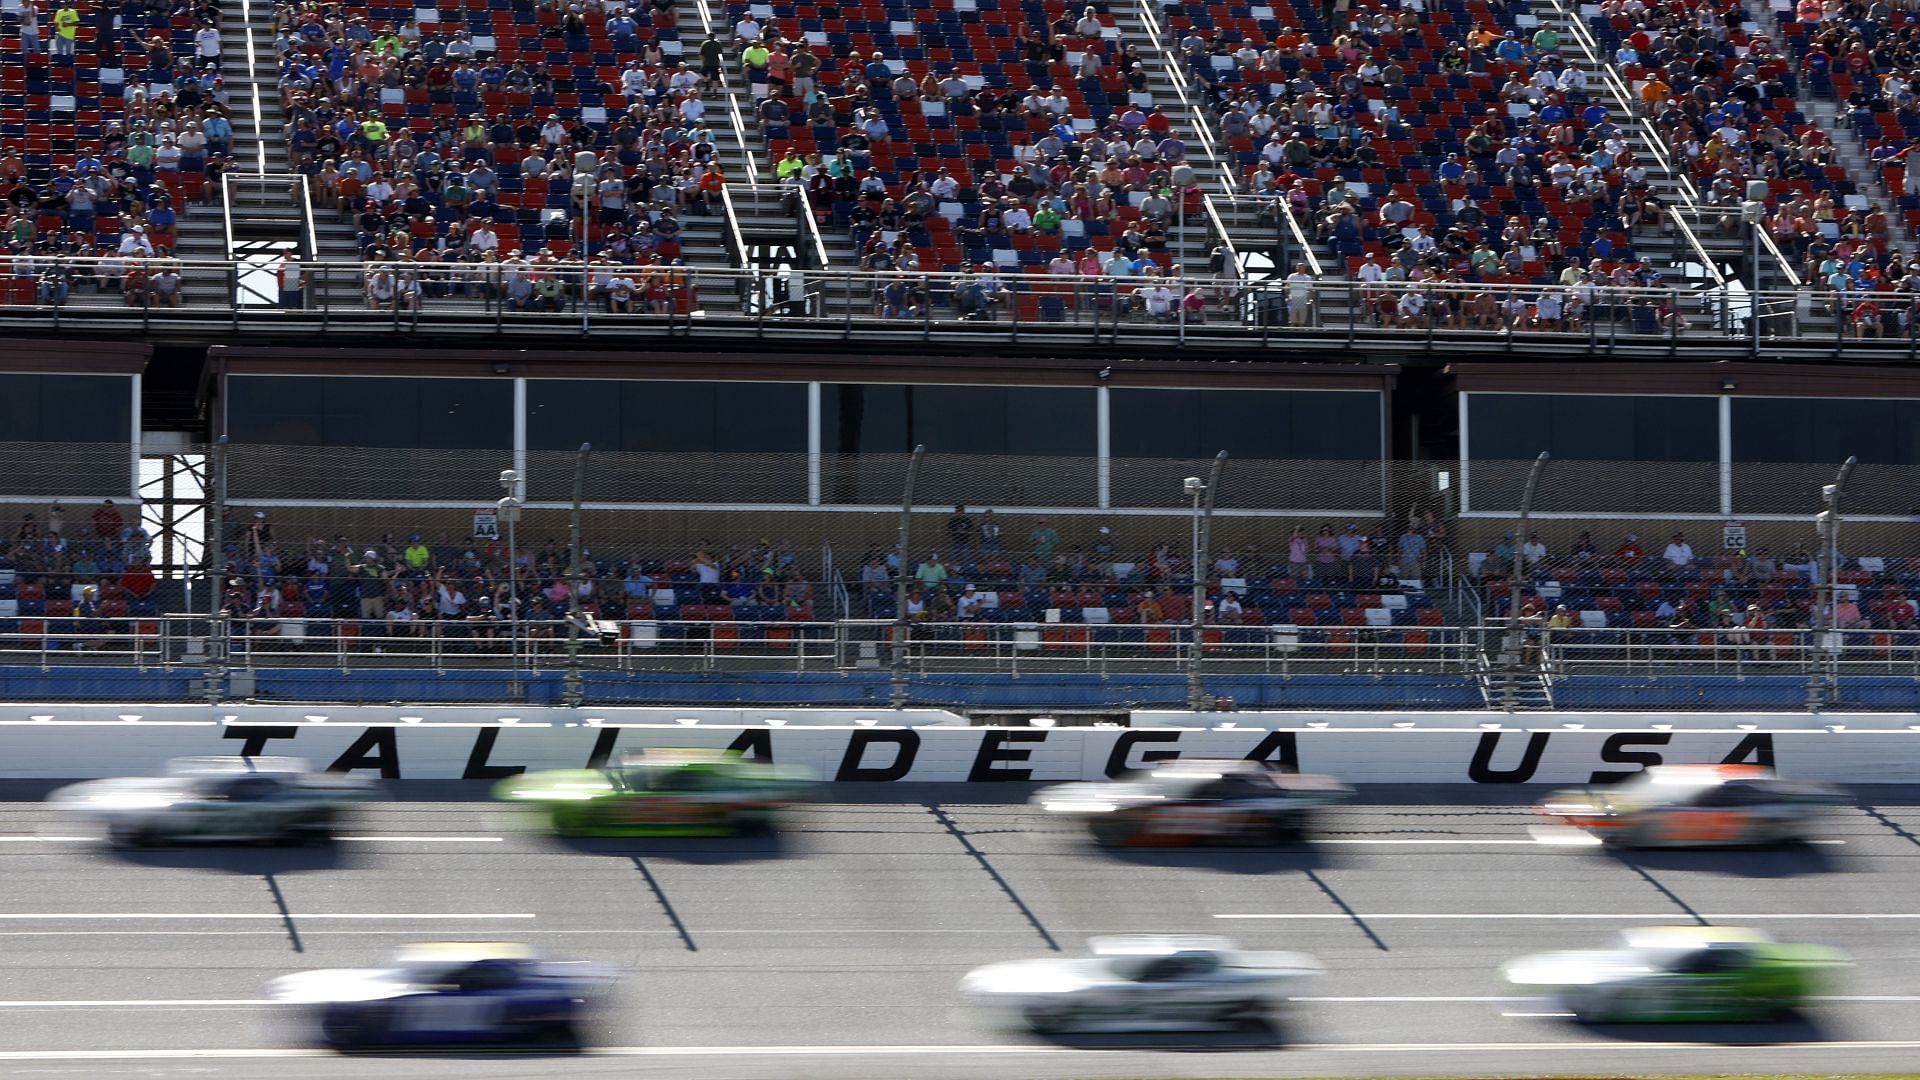 A general view of racing during the Xfinity Series Ag-Pro 300 at Talladega Superspeedway.